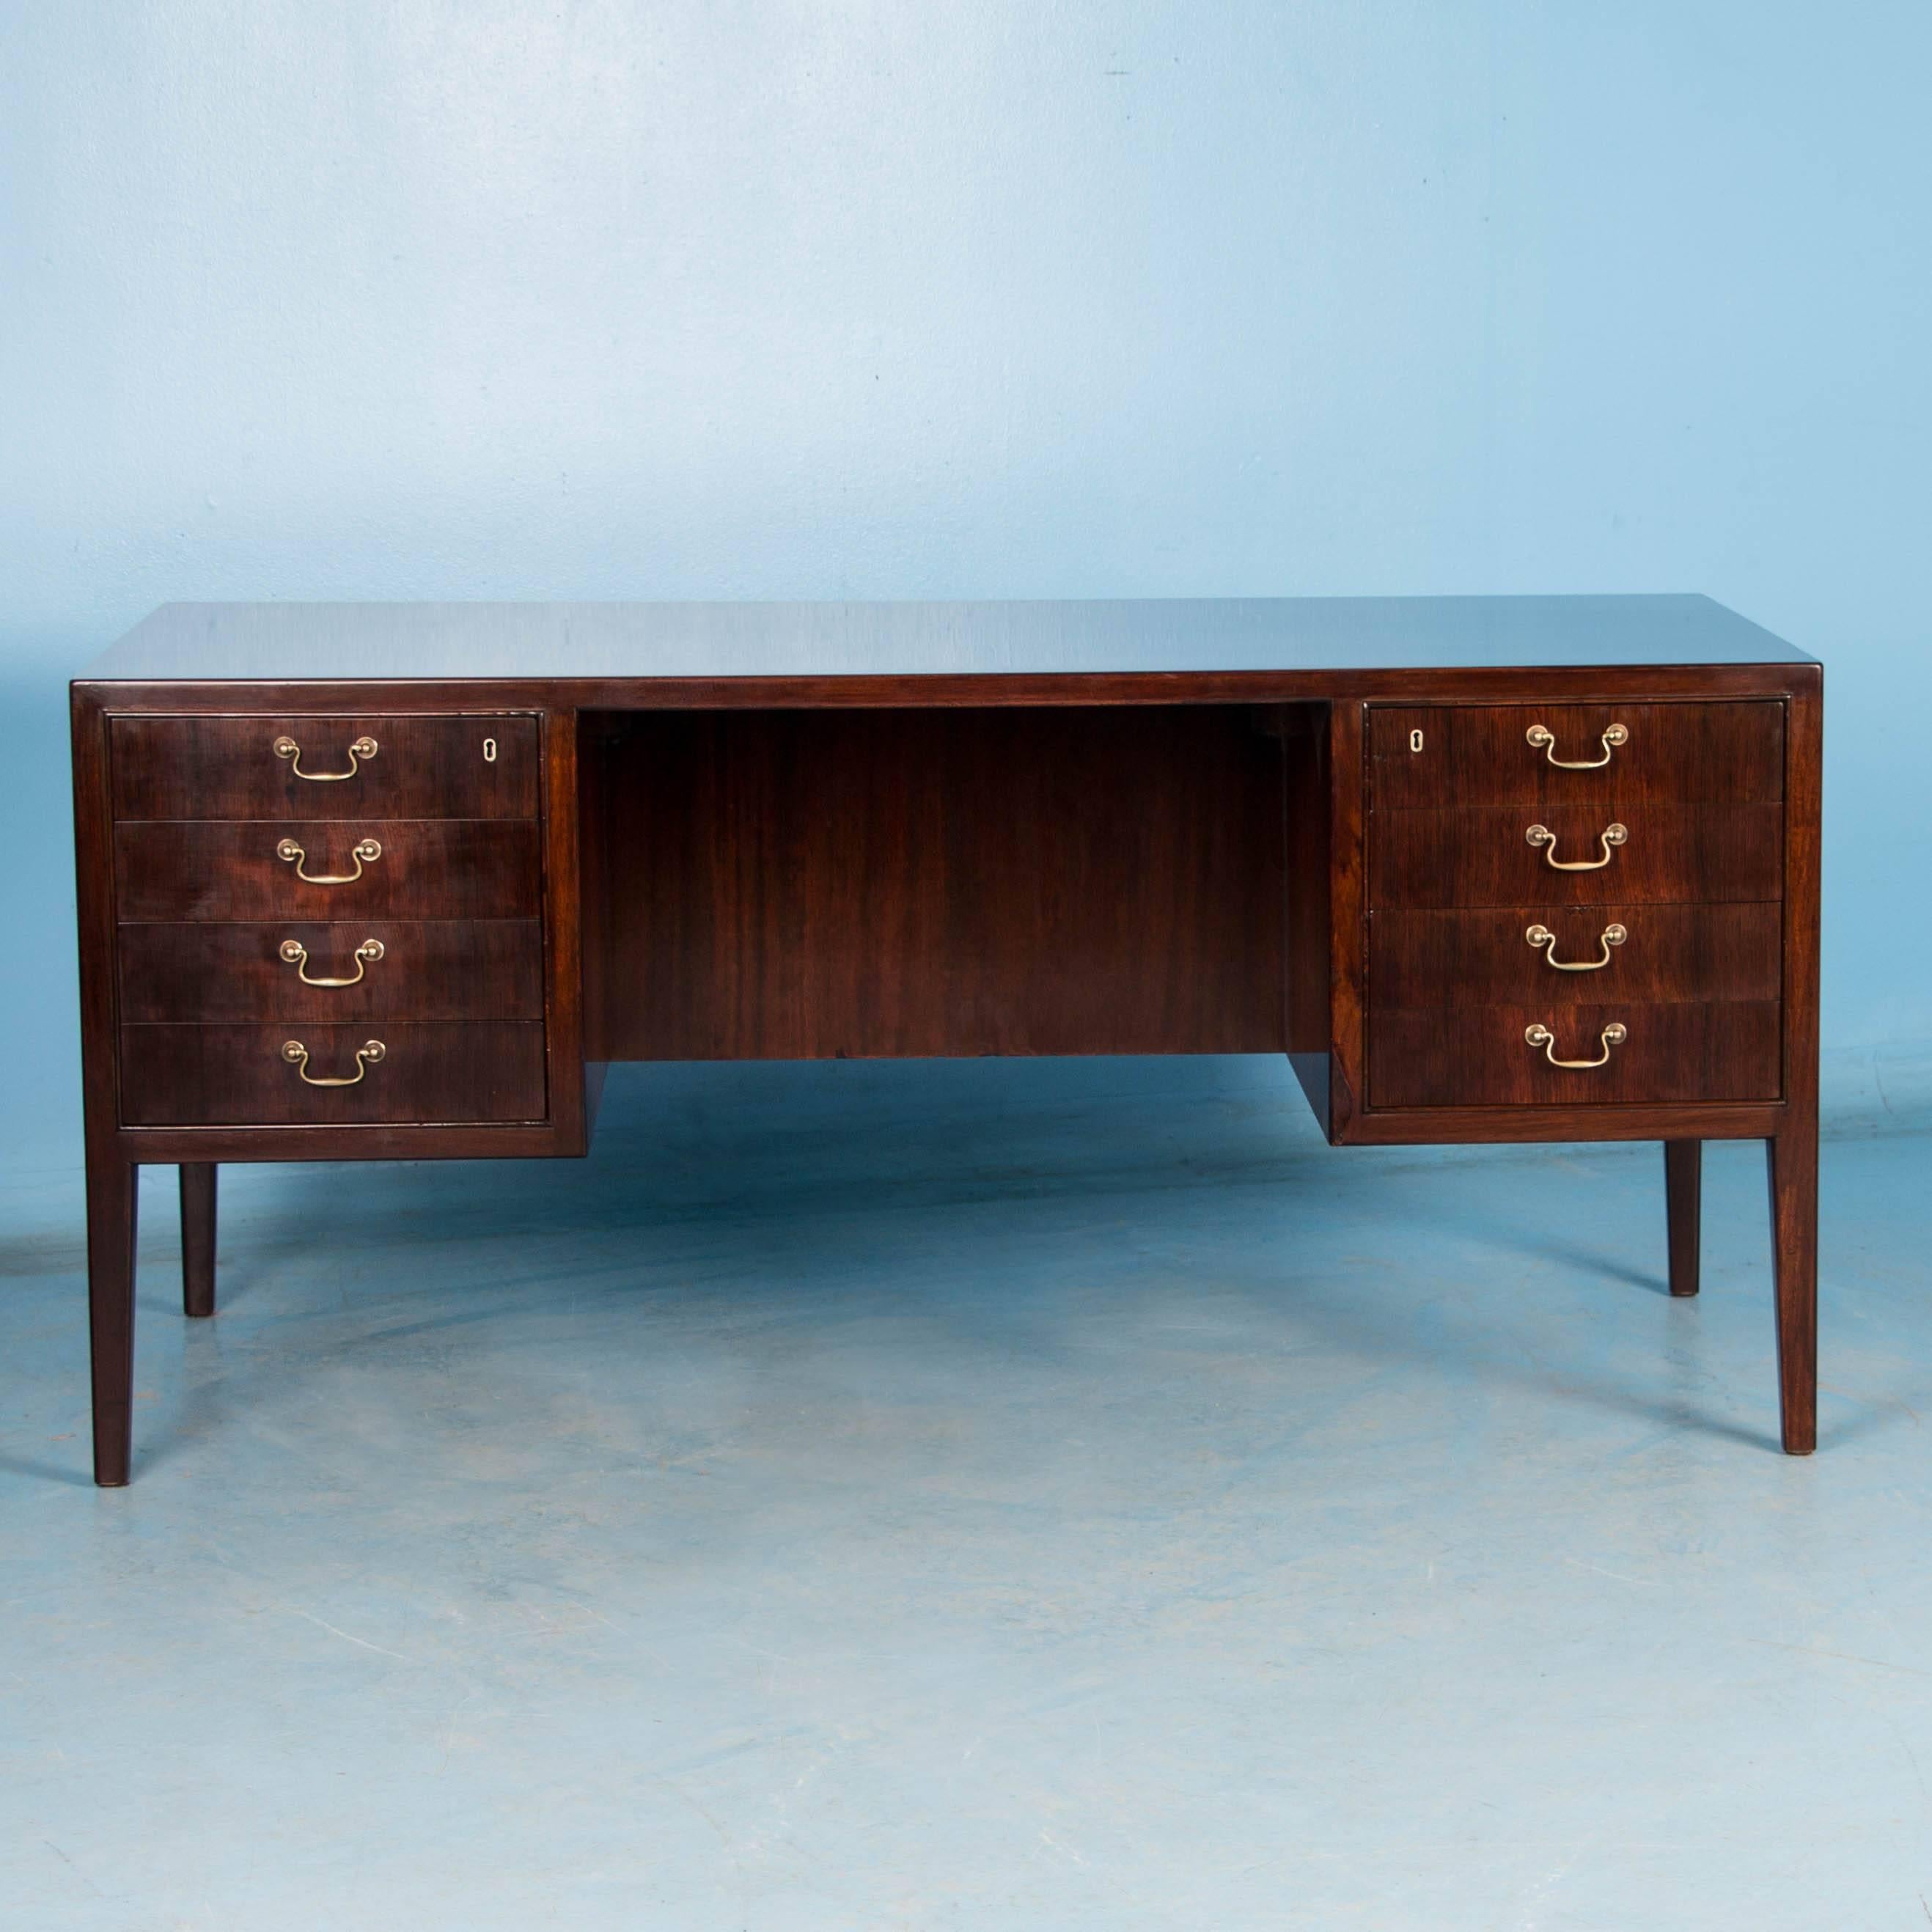 The bookmatched rosewood desk top, sides and drawer fronts are stunning and in exceptional condition. The rich, deep color of the rosewood compliments the mid-century style in this desk with locking drawers and original brass pulls. The tapered legs